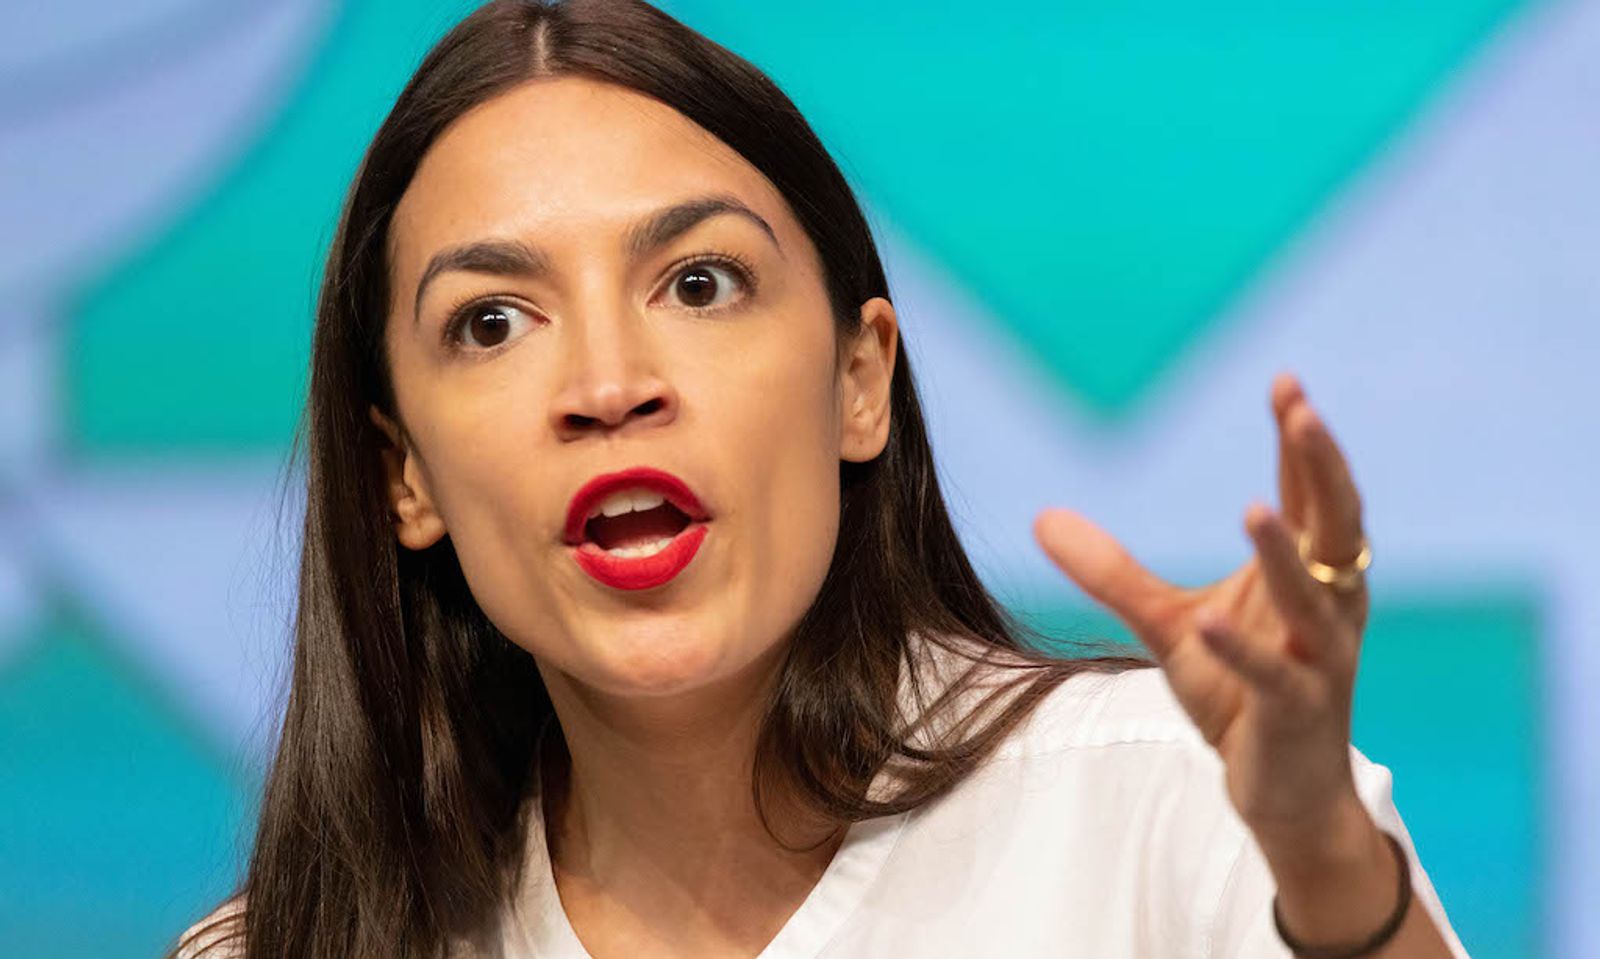 AOC Becomes First in Congress to Call for Full FOSTA/SESTA Repeal